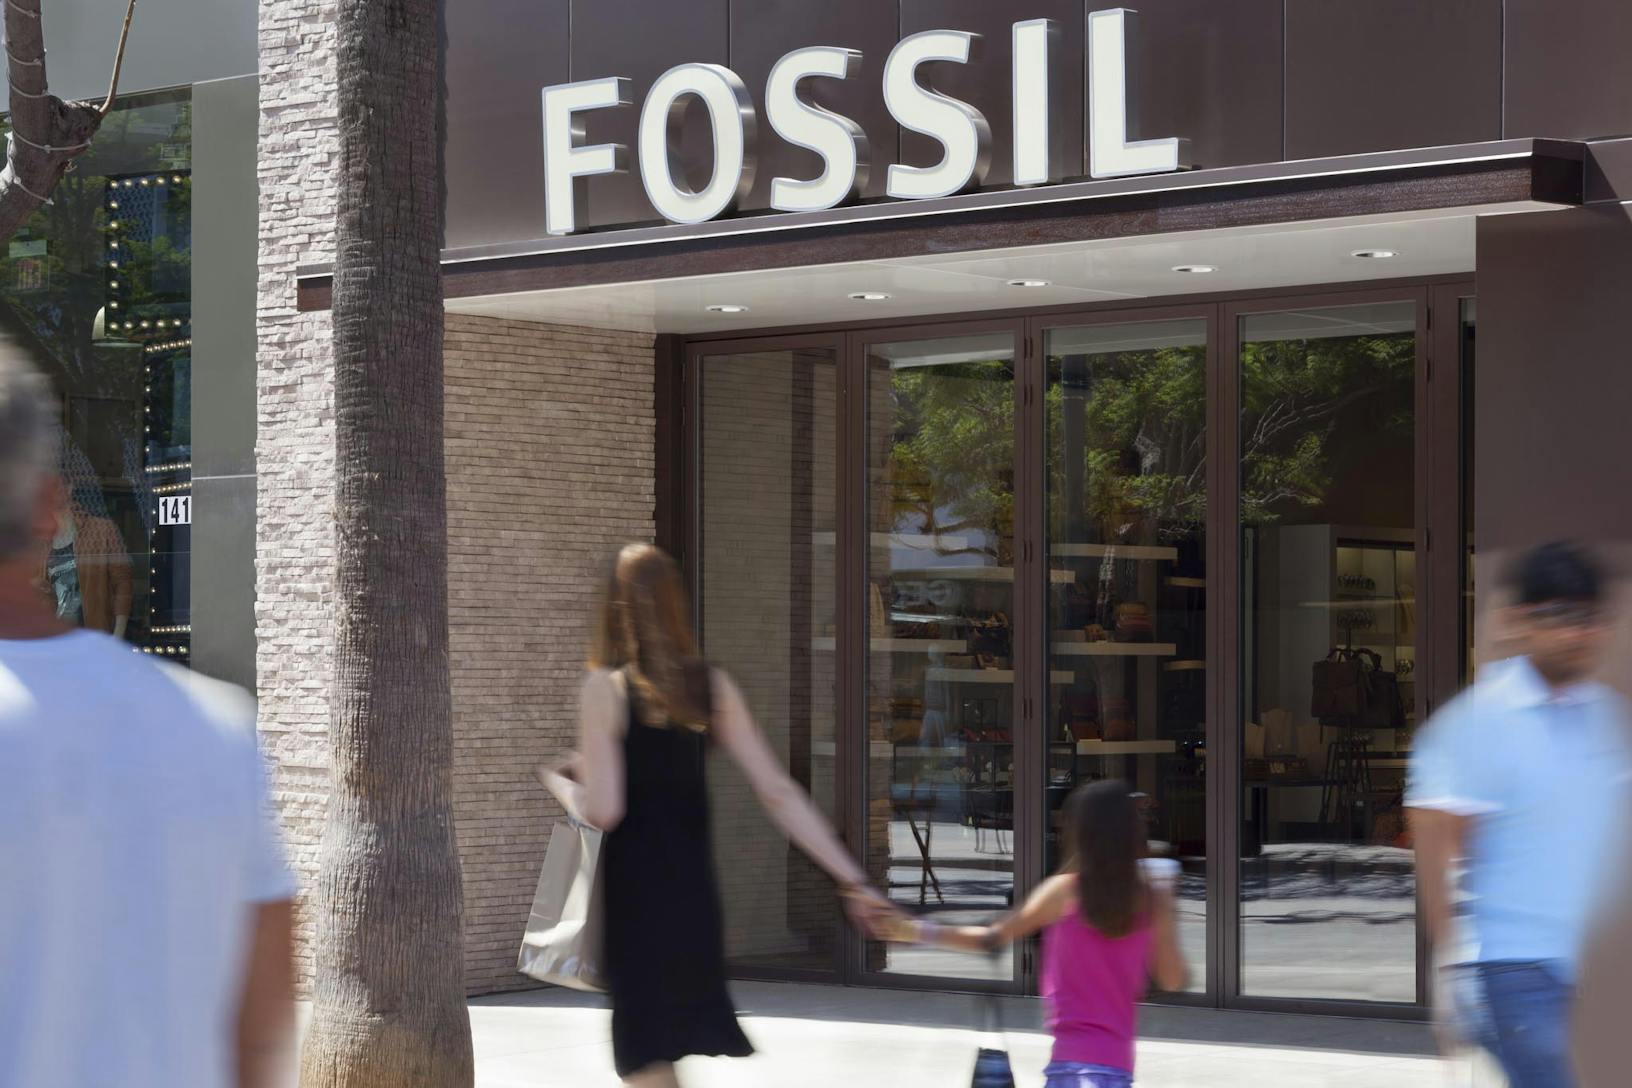 SL70 Retail Folding Entry Doors at the Fossil Store in Santa Monica, CA - Closed Exterior Day View